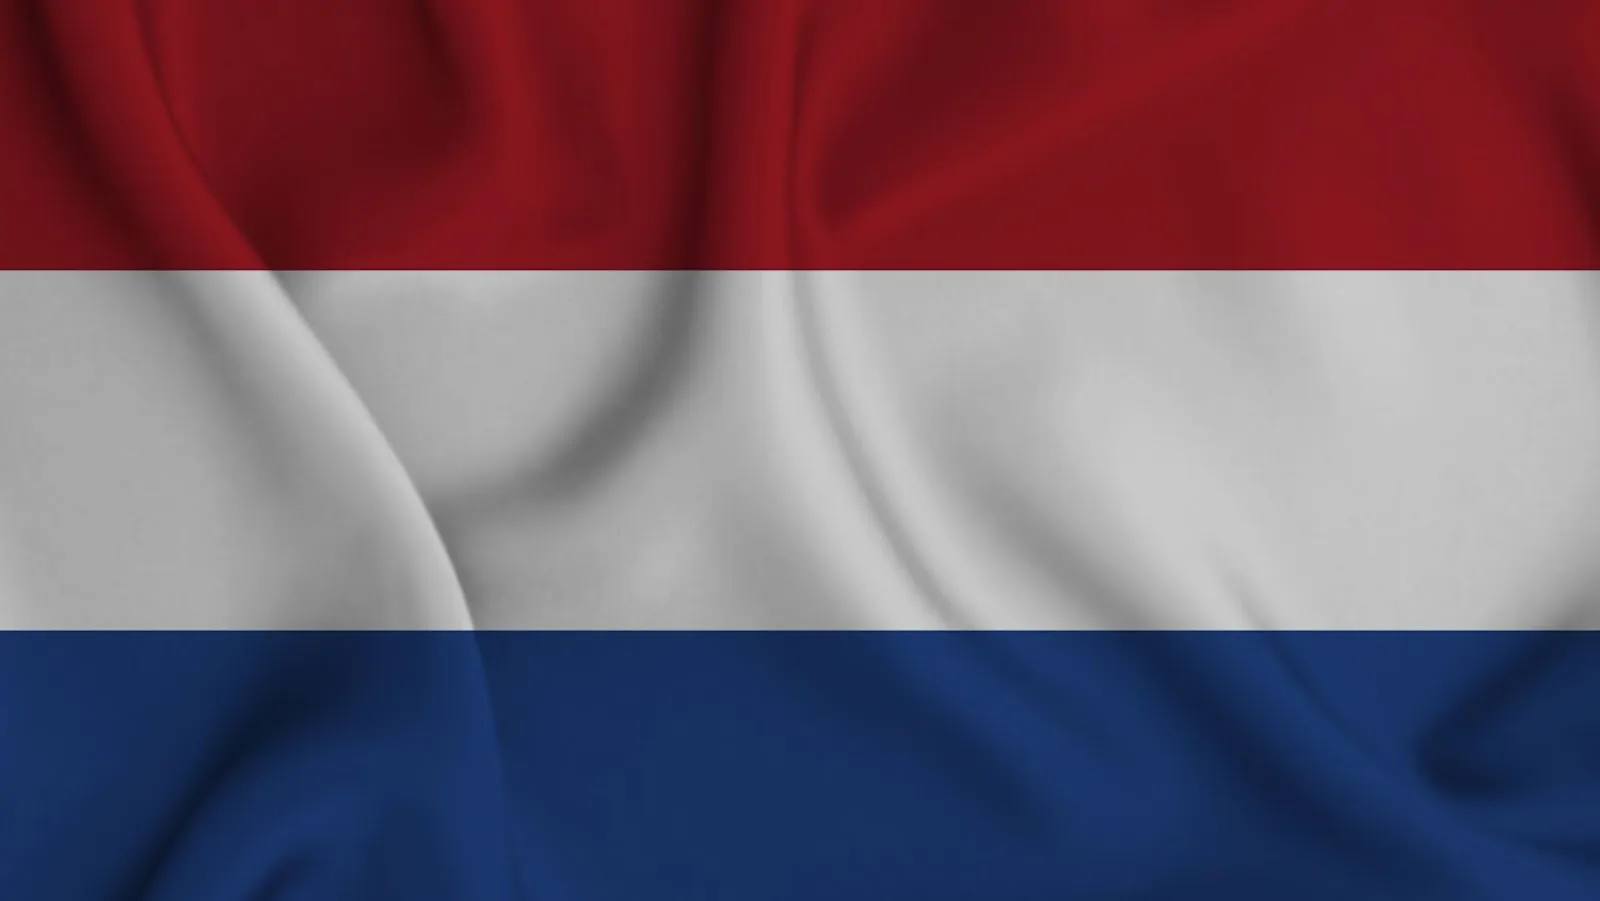 The Rules About Online Gambling in The Netherlands